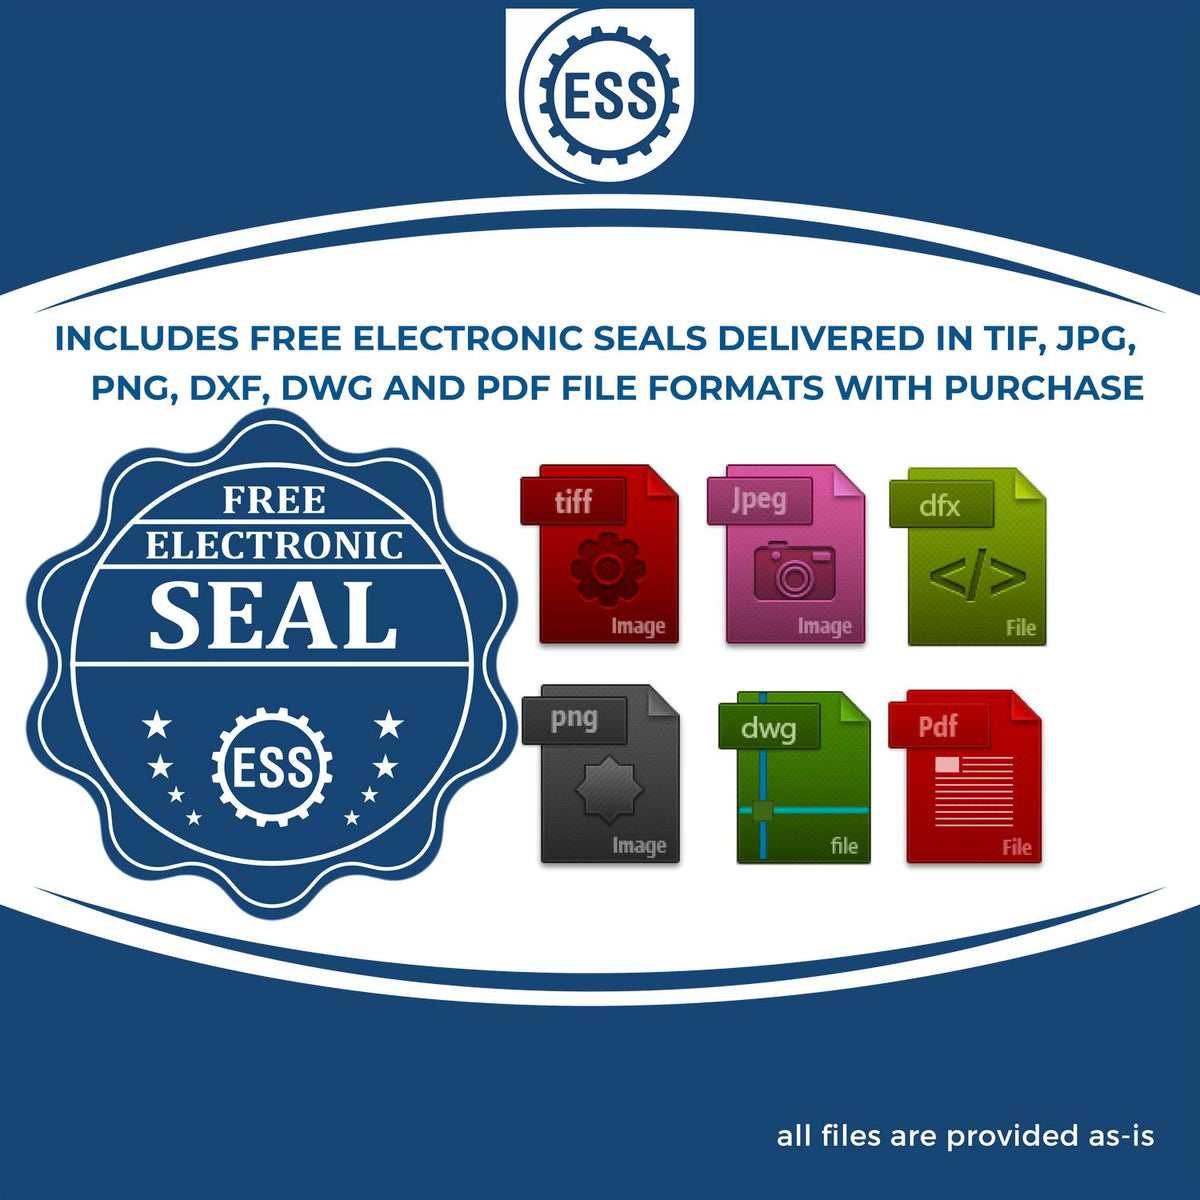 An infographic for the free electronic seal for the Handheld Virginia Professional Geologist Embosser illustrating the different file type icons such as DXF, DWG, TIF, JPG and PNG.